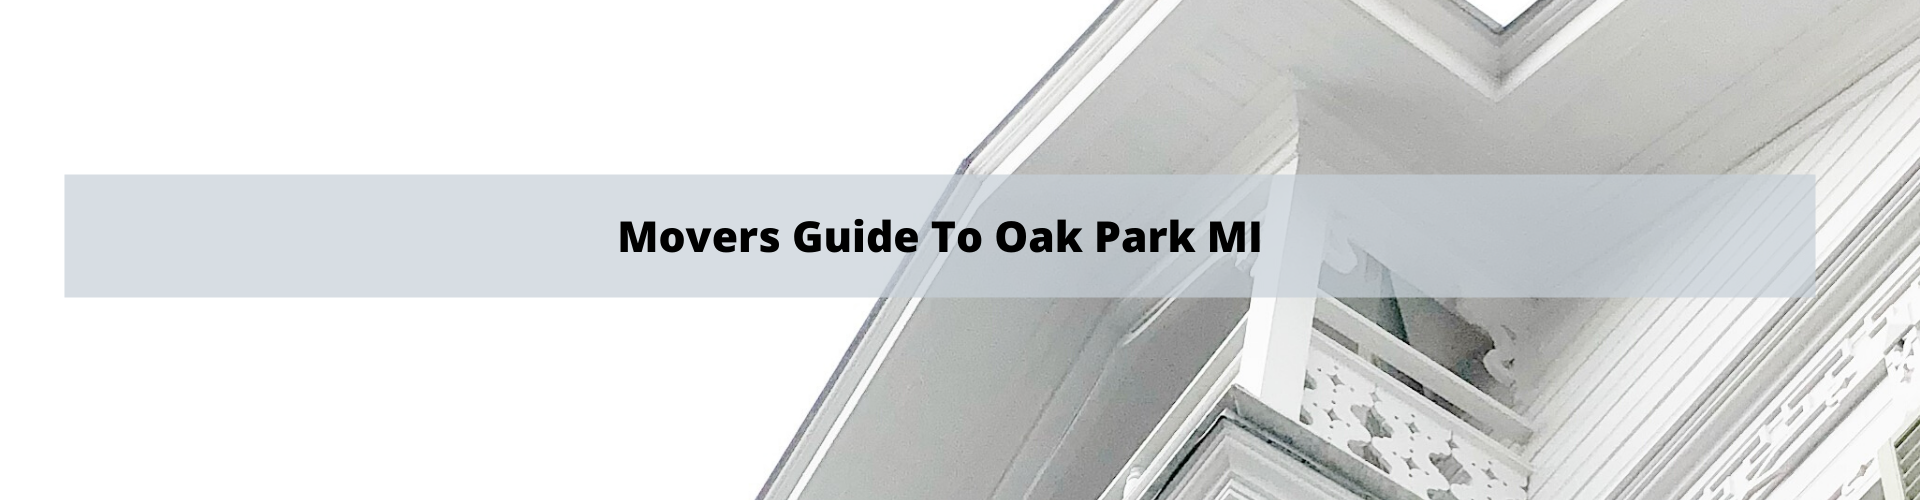 Movers Guide To Oak Park MI